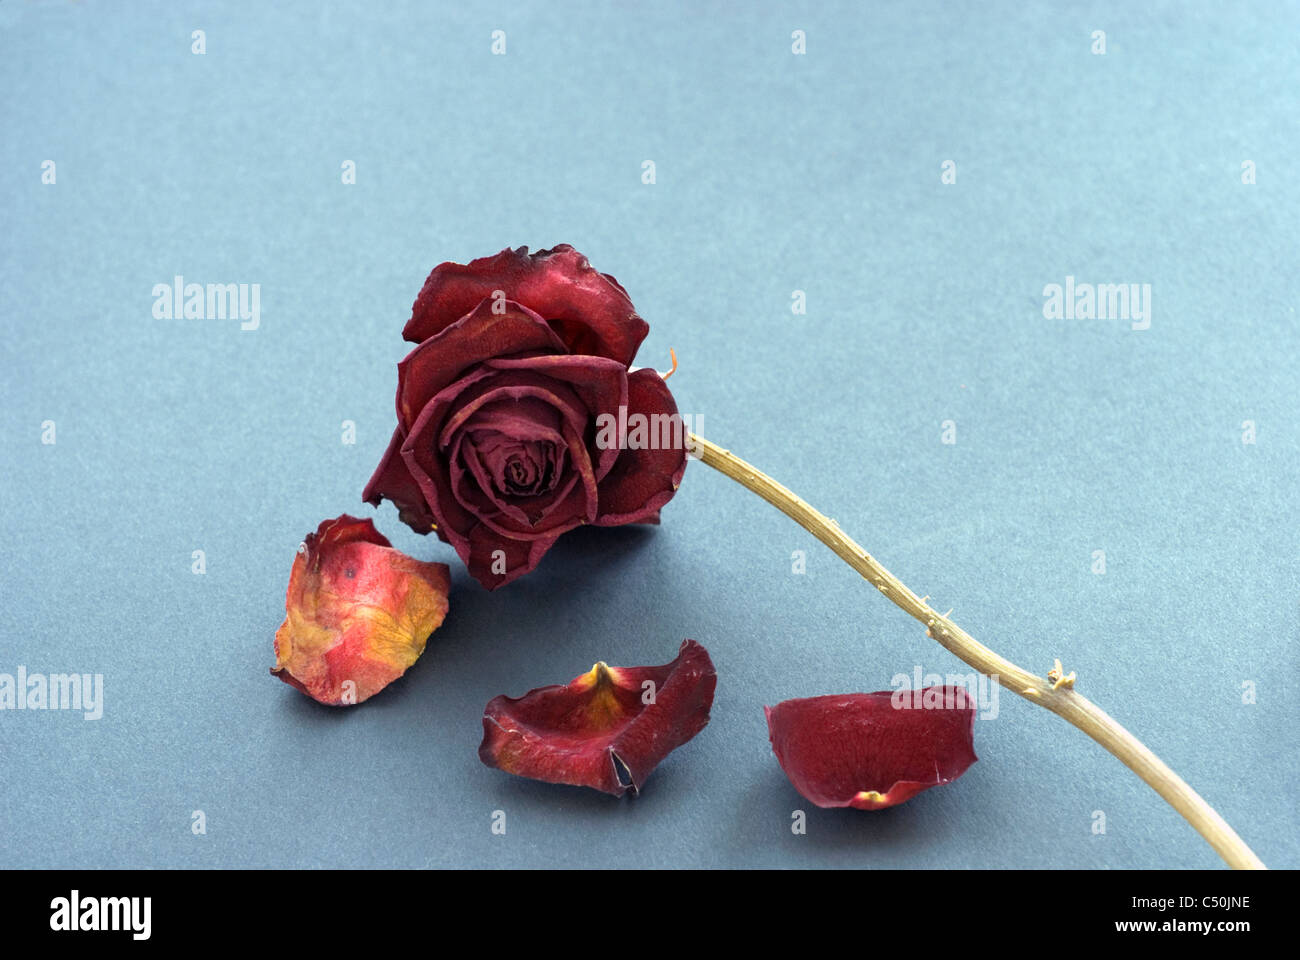 Dried and dessicated rose flower Stock Photo